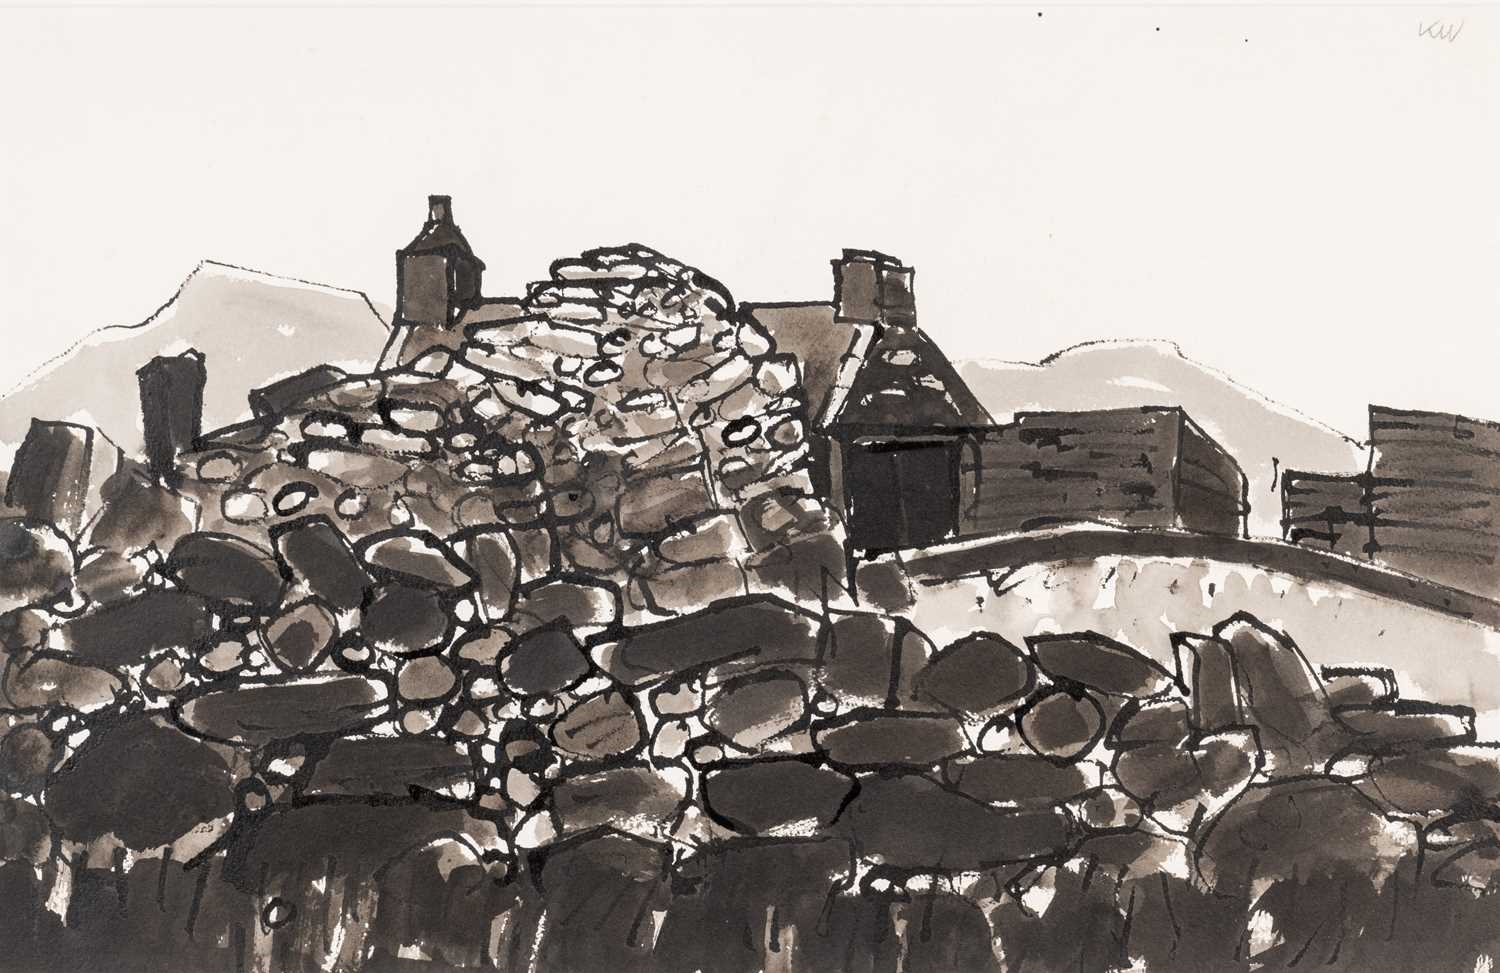 ‡ SIR KYFFIN WILLIAMS RA ink and wash - upland stone dwelling and drystone walls